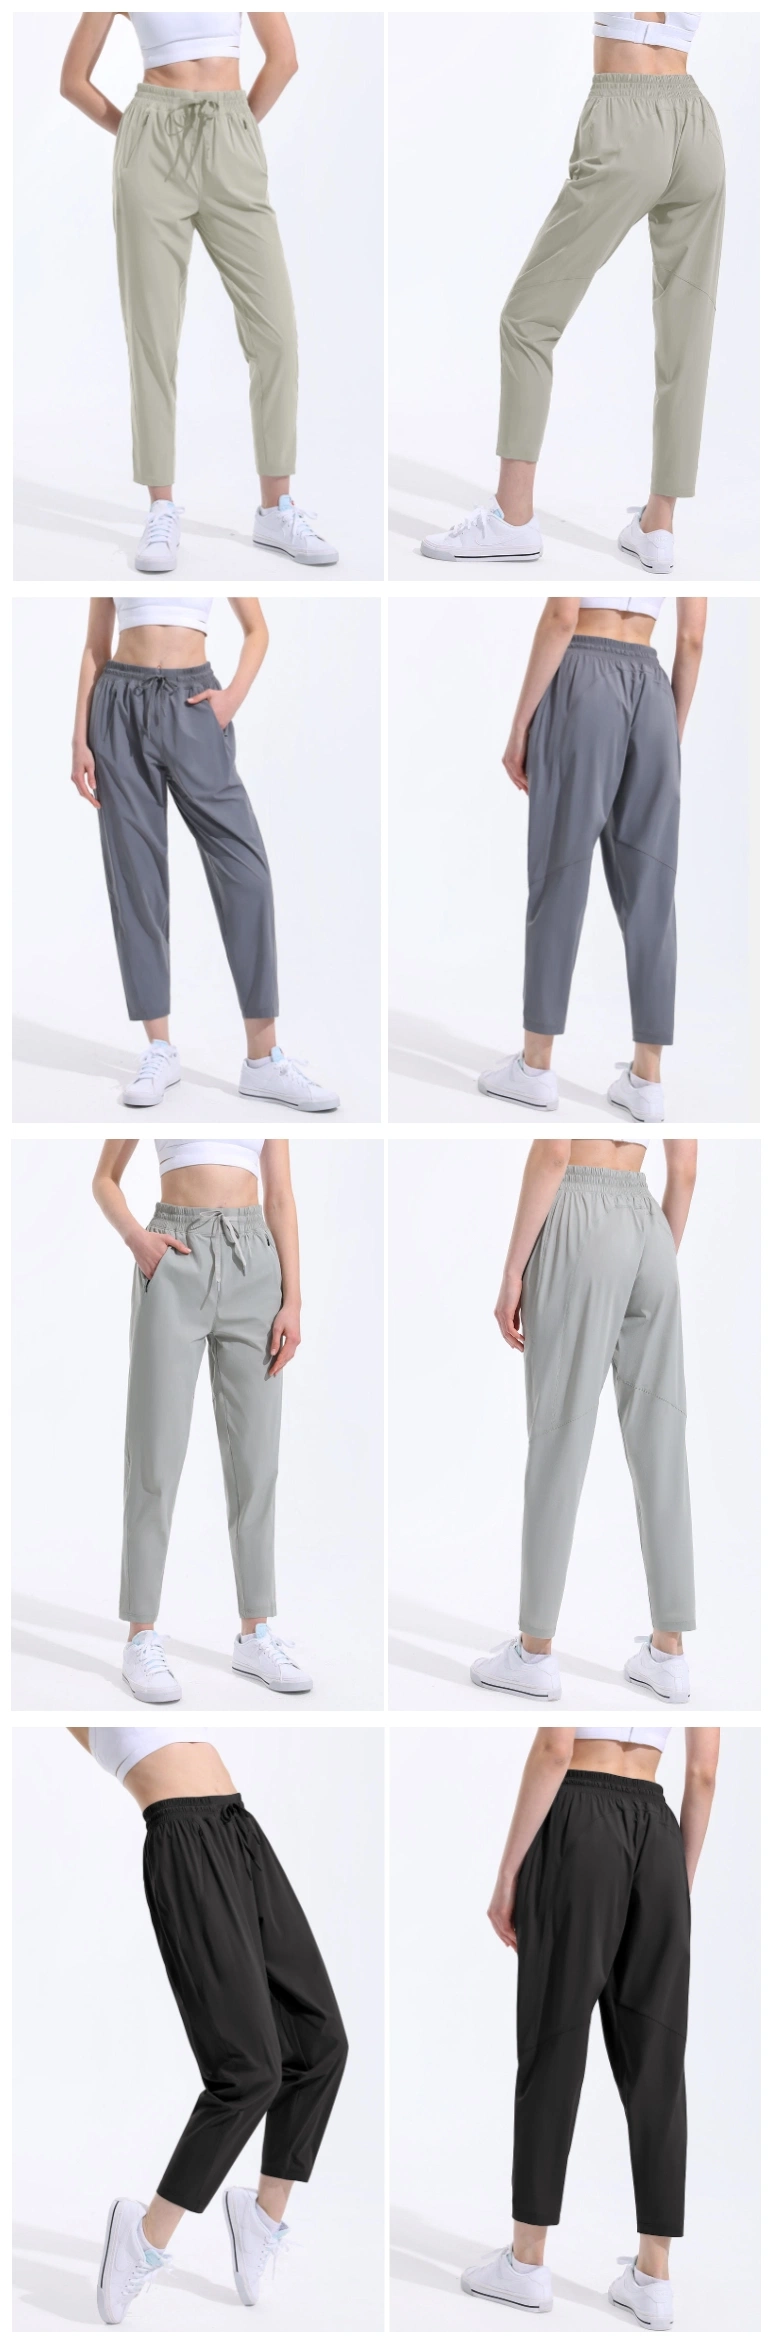 Xsunwing Wholesale Sweat Suits Ropa Deportiva Sportswear Sports Wear Textile Yoga Wear Gym Wear Clothing Long Pants Jogger for Ladies Spring Autumn Wholesale